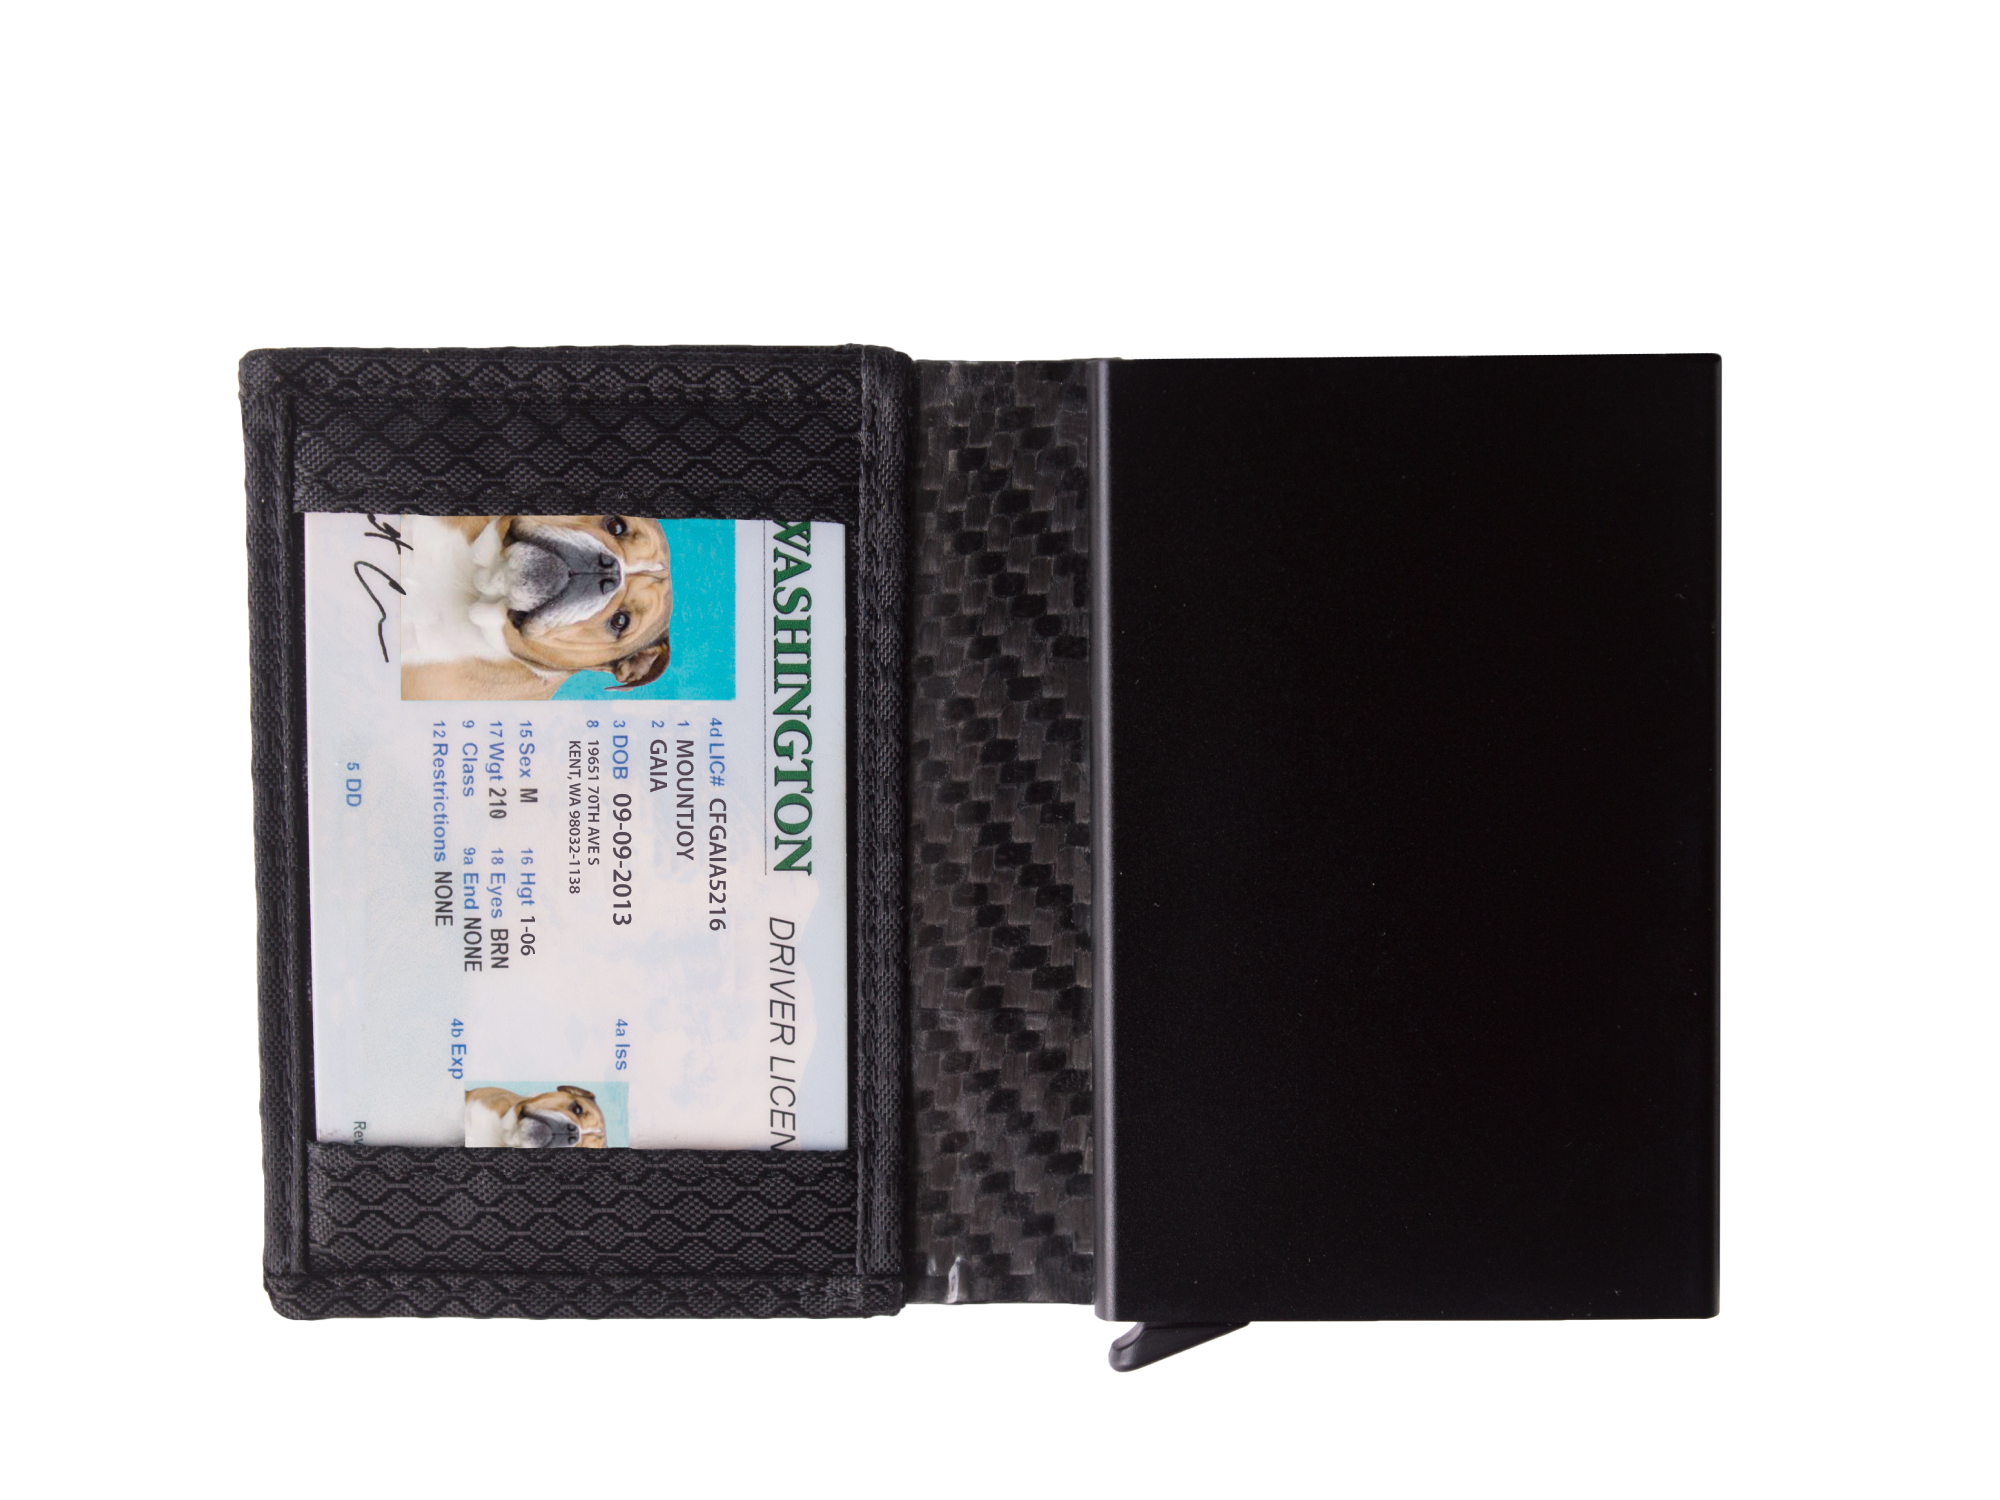 Black ripstop nylon interior with I.D slot and slider for cards